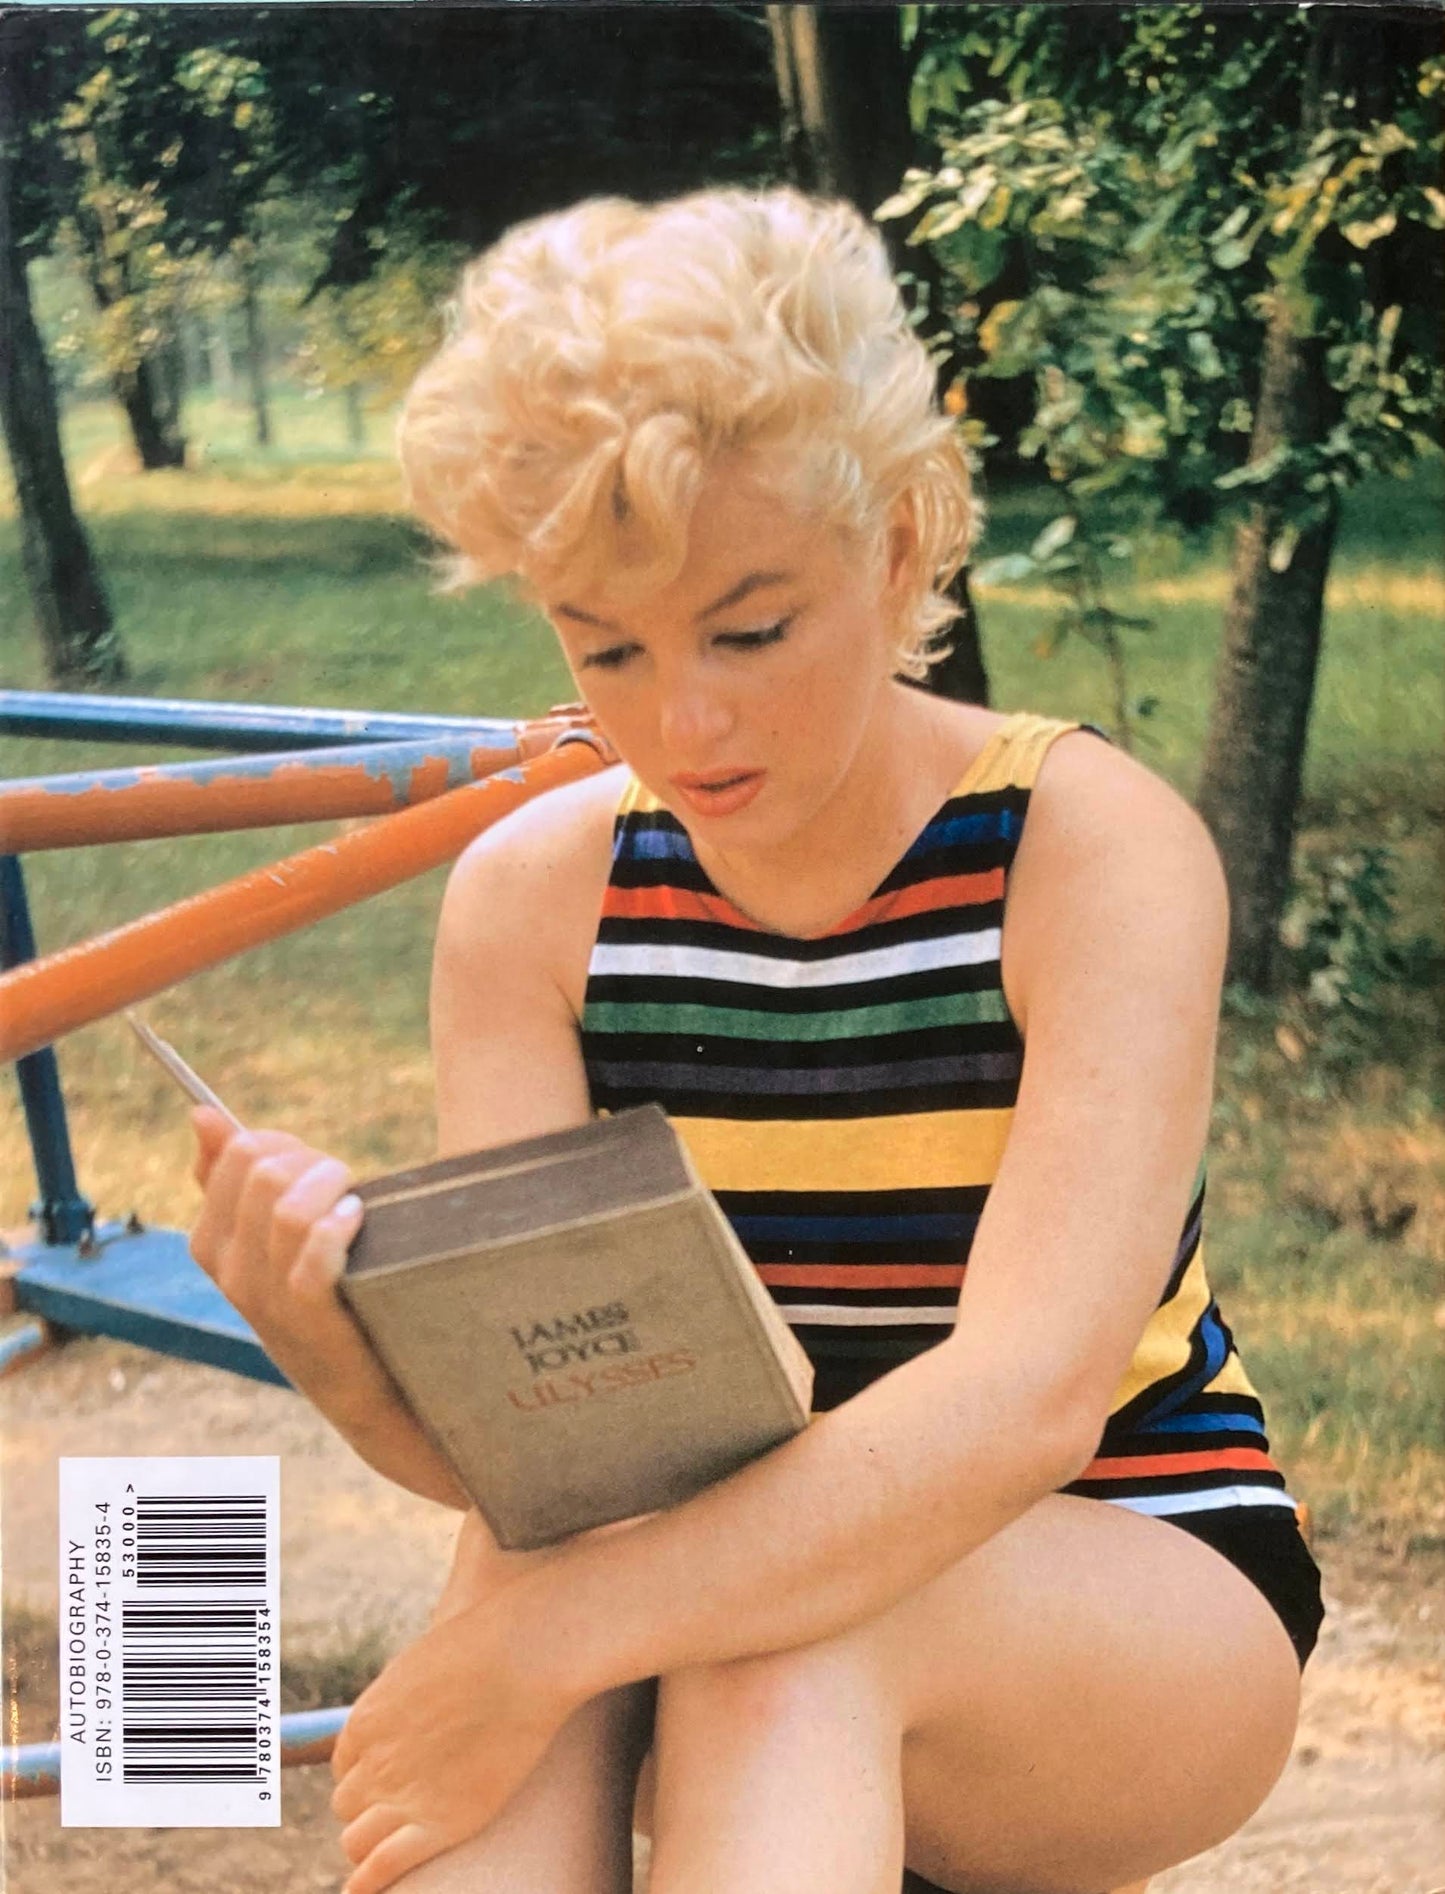 Fragments  Poems, Intimate Notes, Letters  by Marilyn Monroe